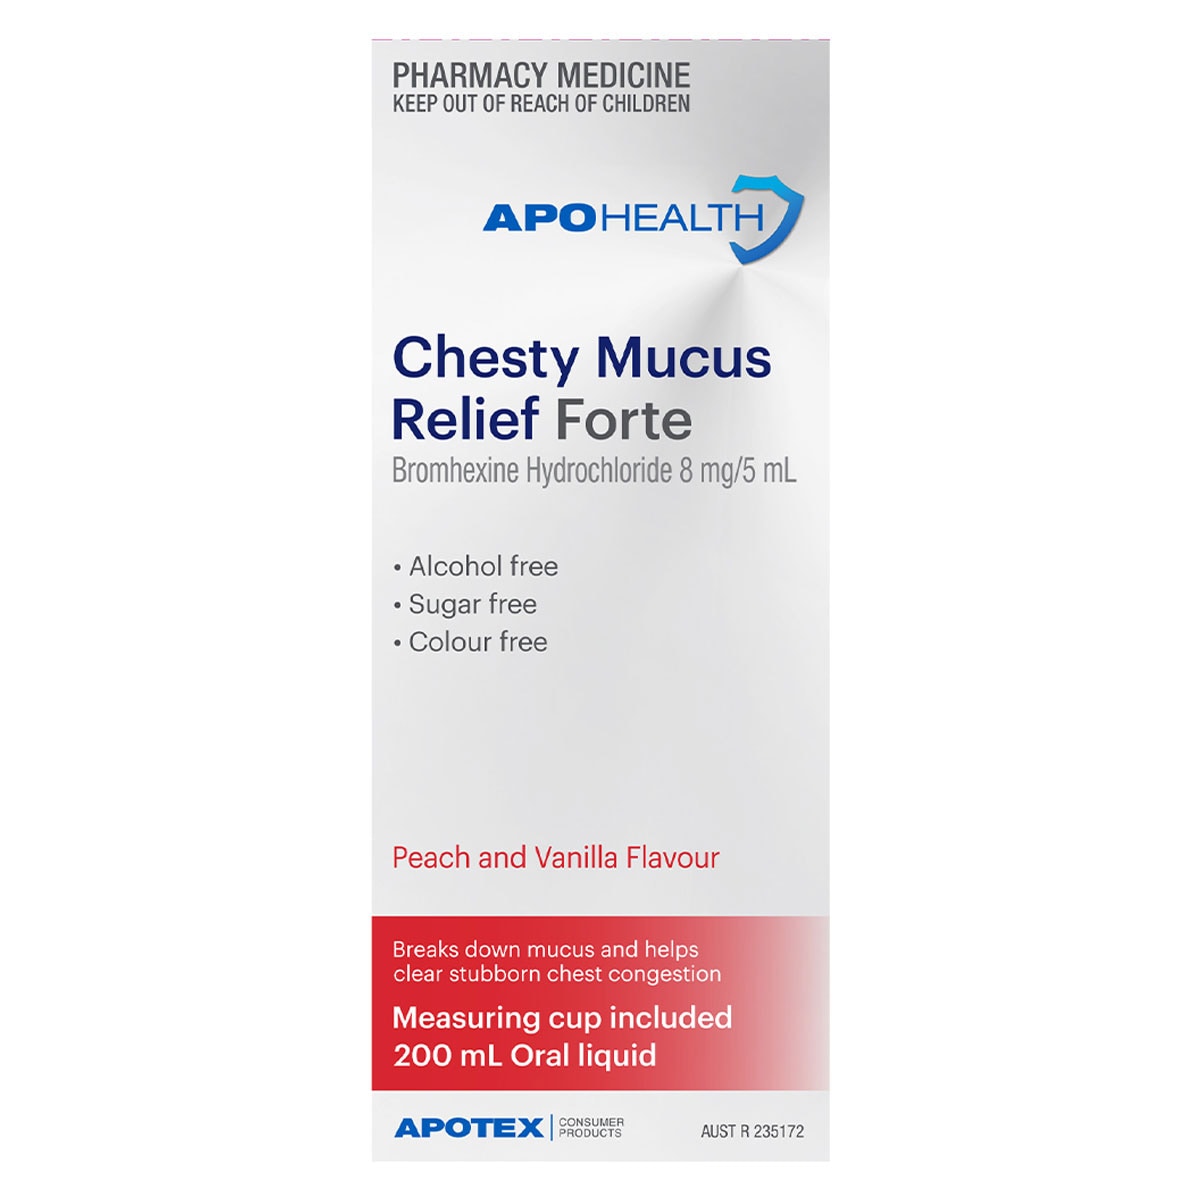 APOHEALTH Chesty Mucus Relief Forte 200ml